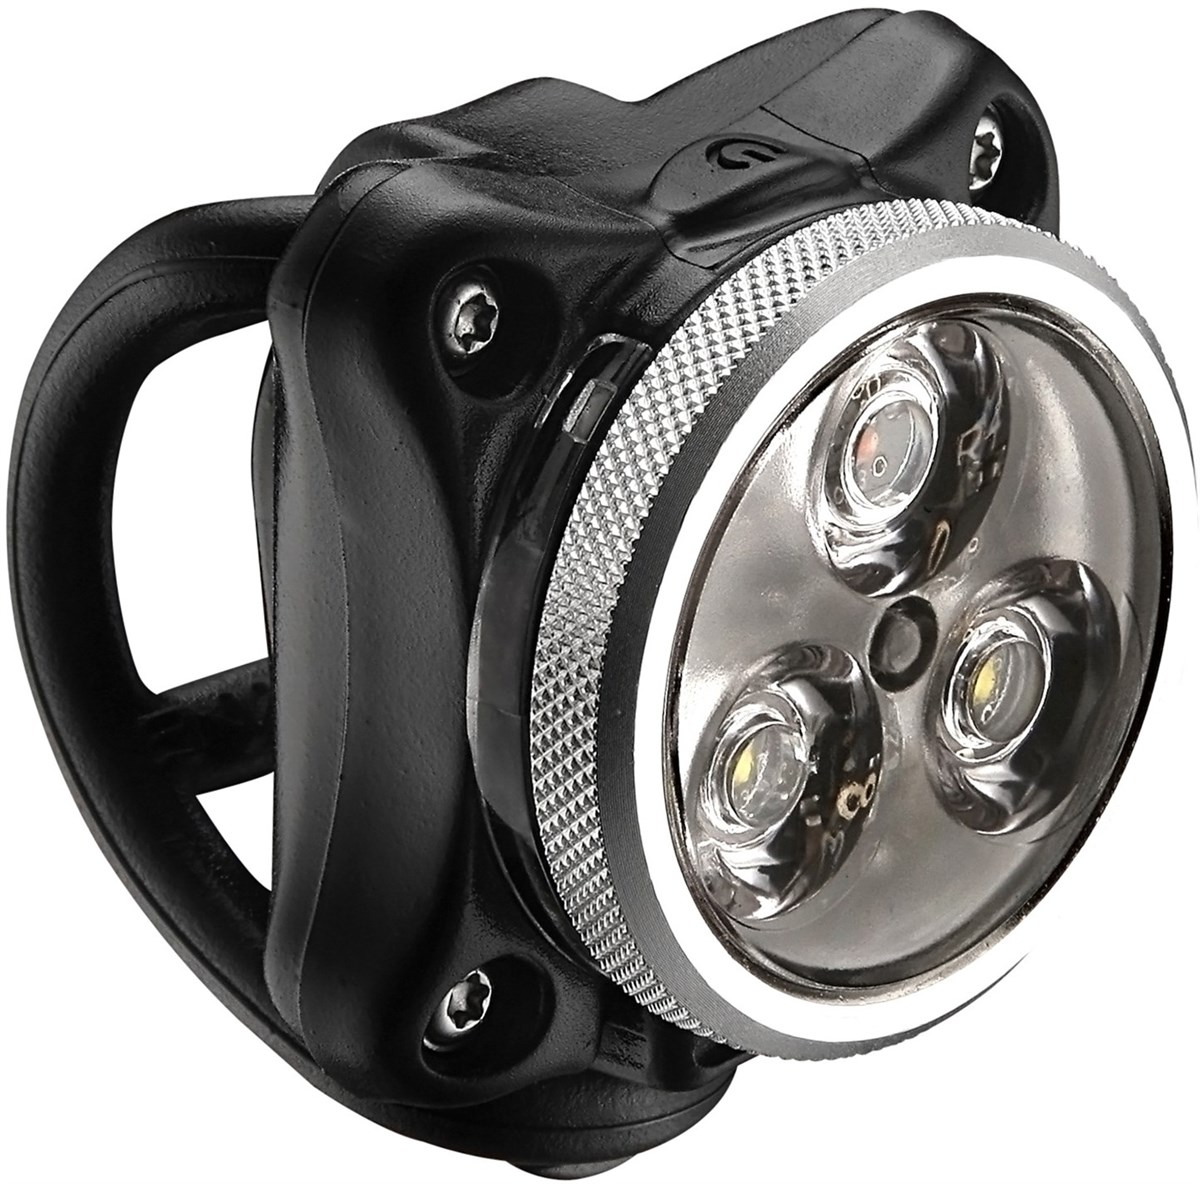 Lezyne Zecto Drive Pro LED USB Rechargeable Front/Rear Light product image